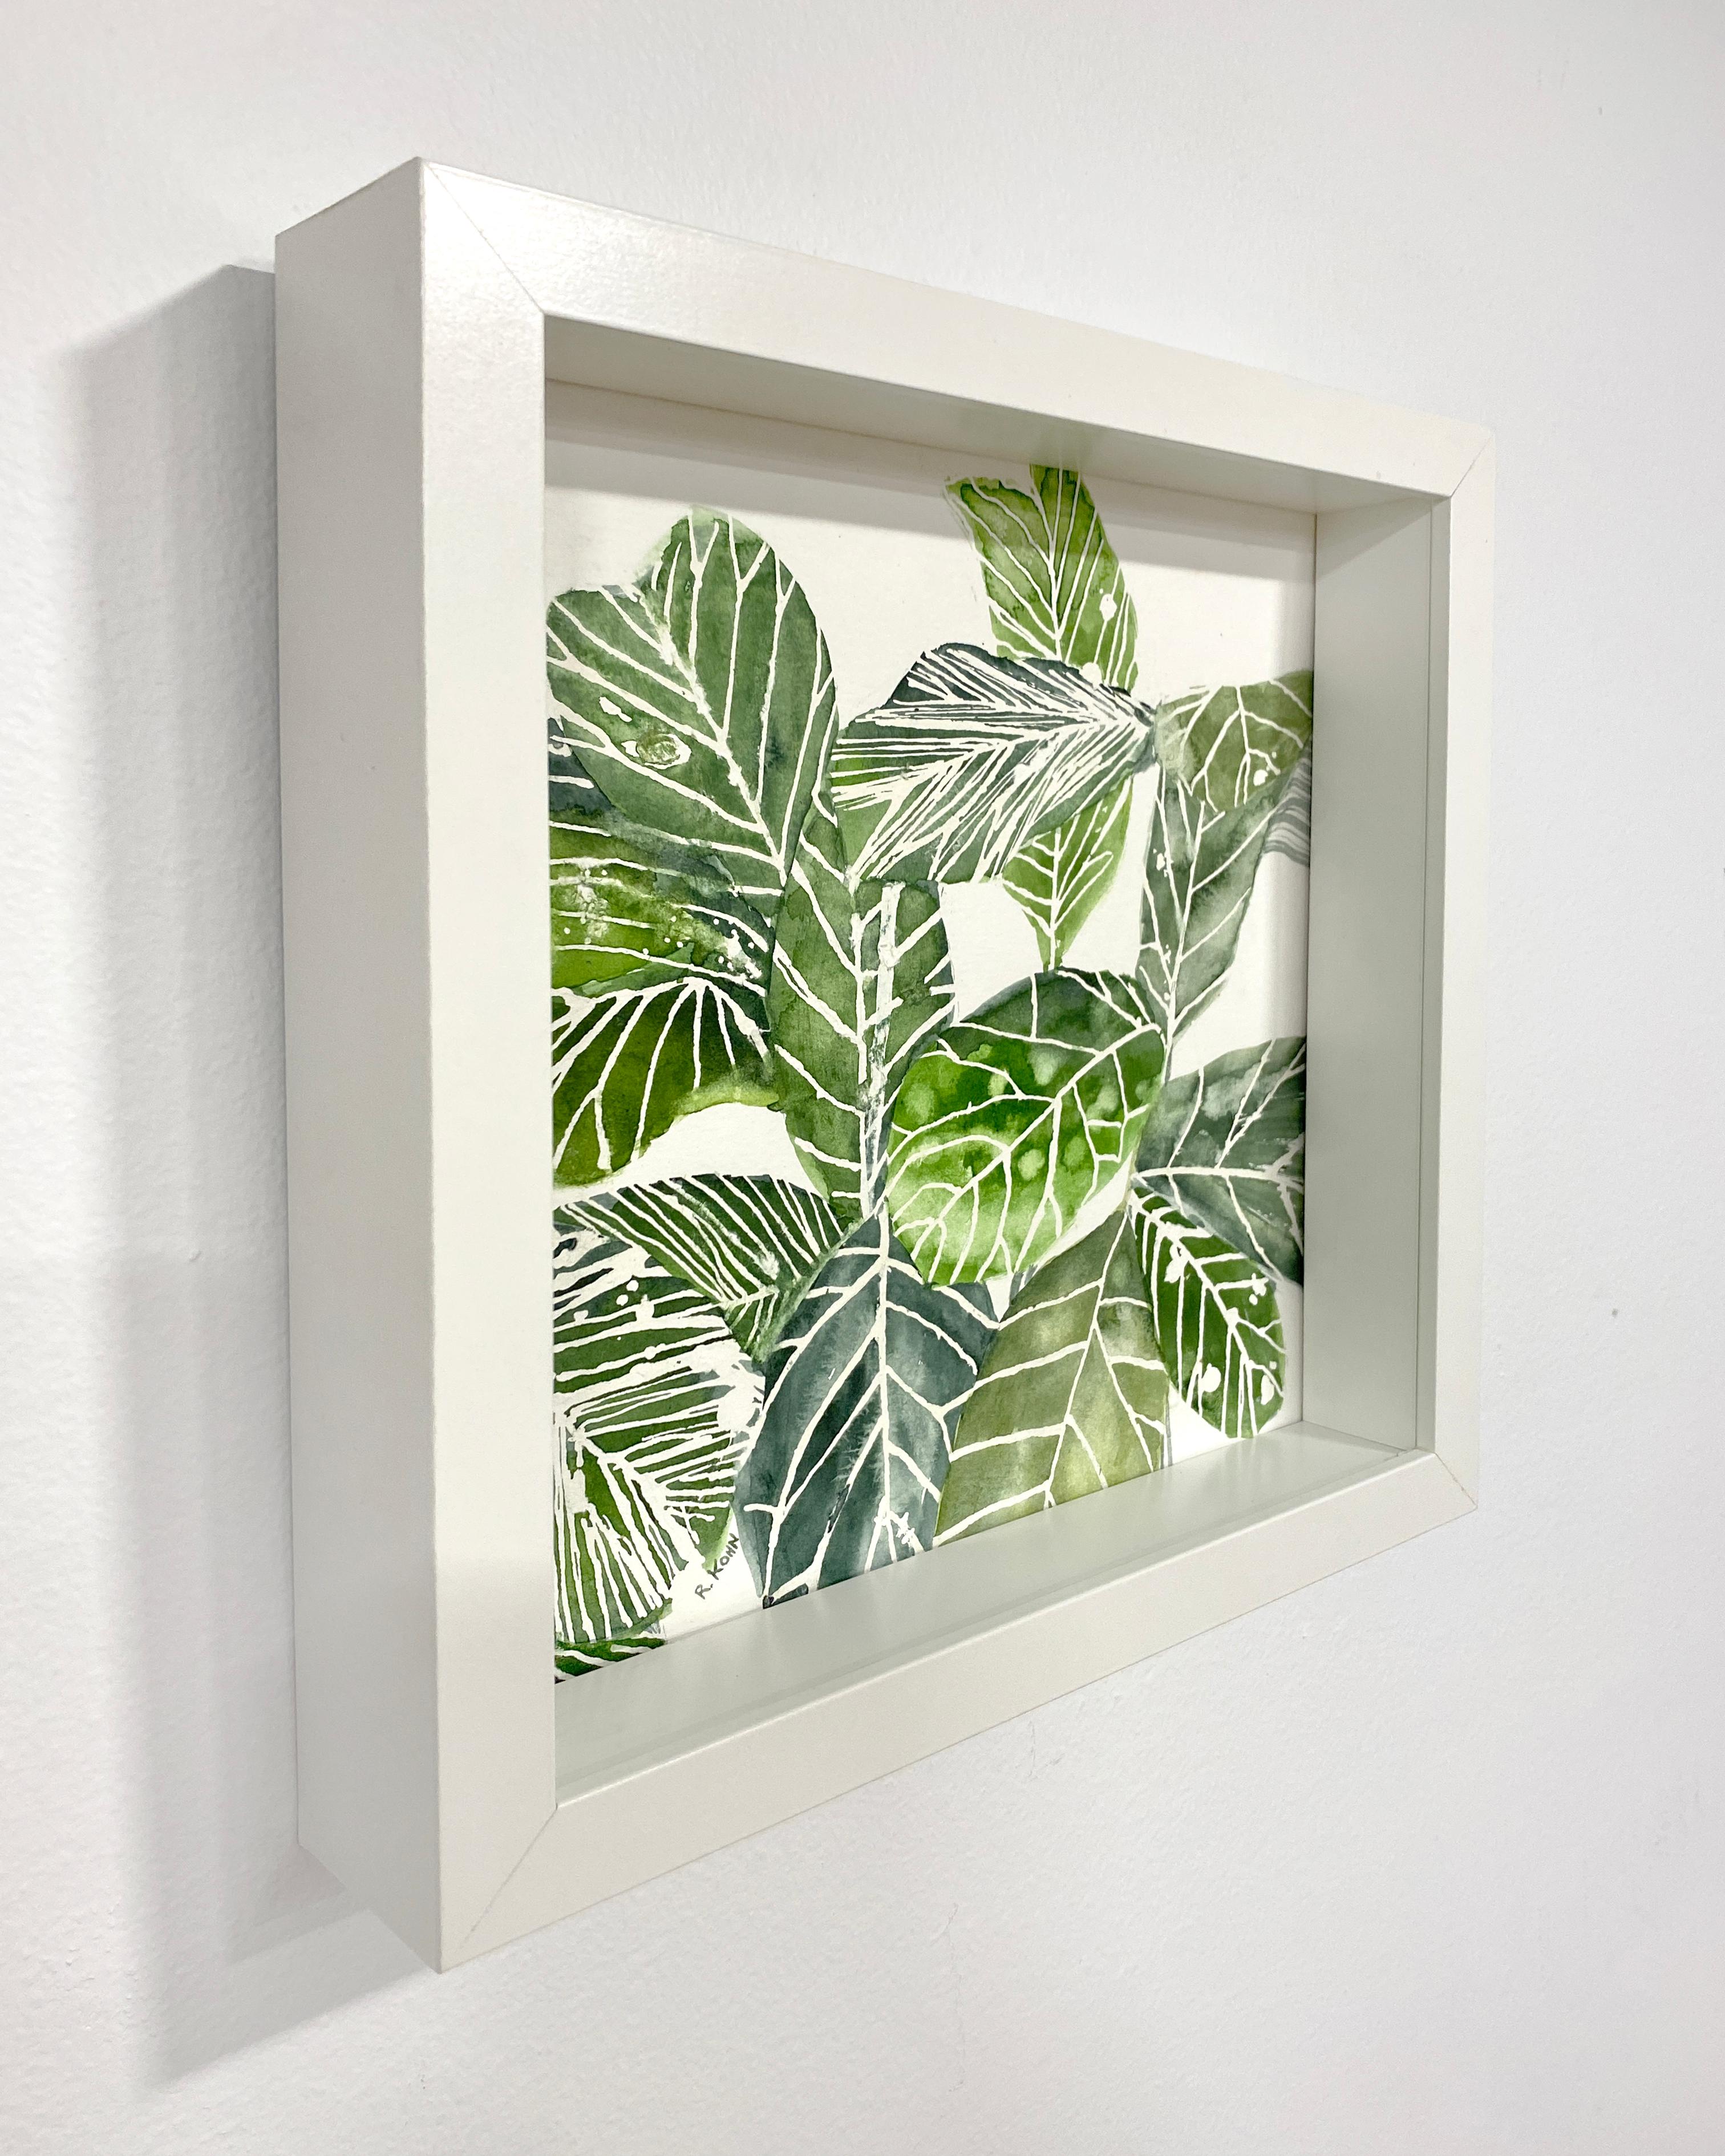 These beautiful watercolor and ink botanical plant paintings allow the viewer to be absorbed in her process as much as the imagery itself and enjoy the play of pattern and design within the pools of green within the foliage. The choice of plants to